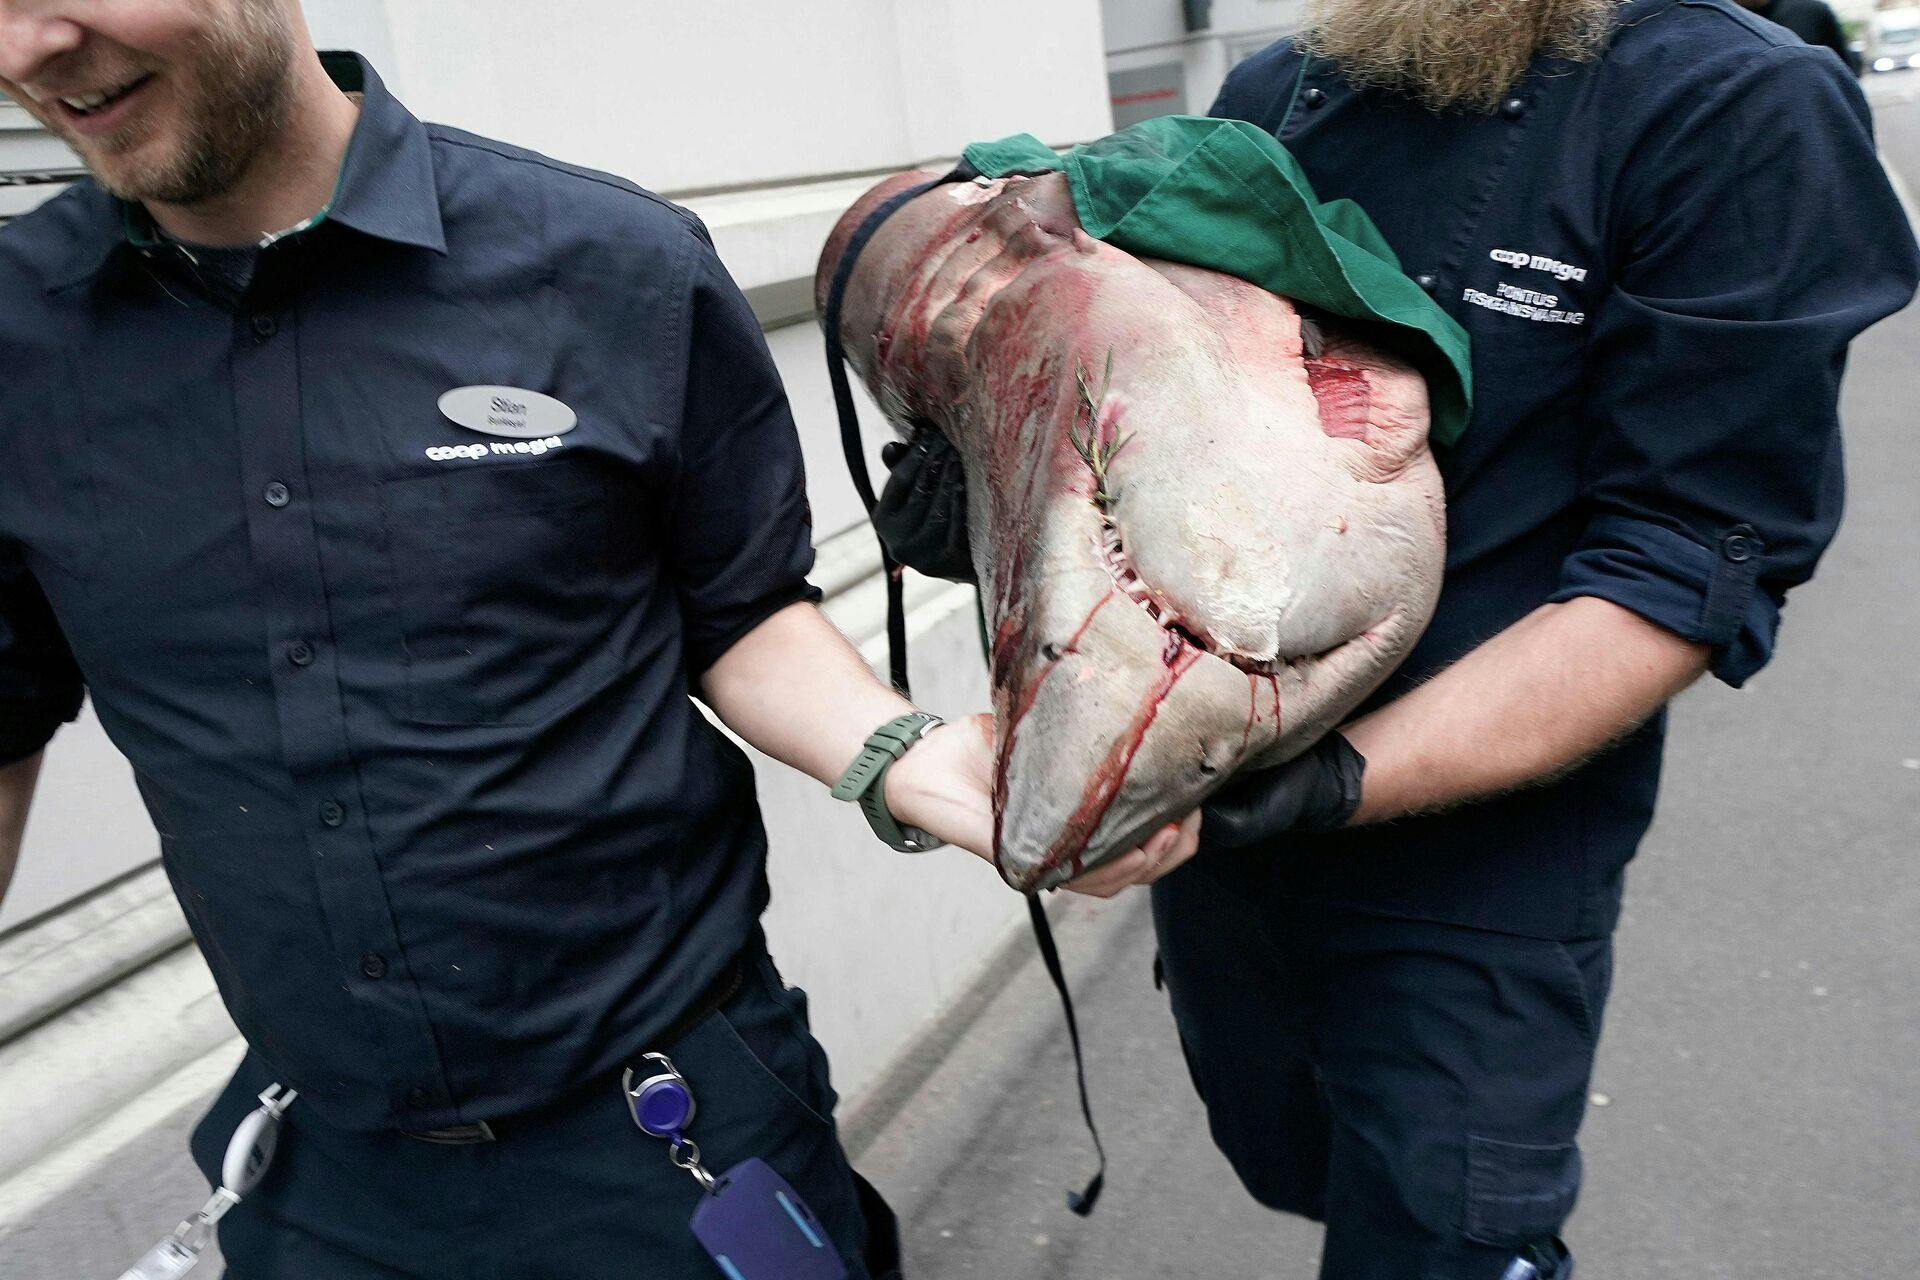 Staff members of the Coop Mega grocery store carry a shark's head which was found on the street outside the sushi restaurant in Oslo, Norway on August 17, 2023, where it was dropped by accident after it was sold from a grocery store in the area according to local reports. (Photo by Stian Lysberg Solum / NTB / AFP) / Norway OUT